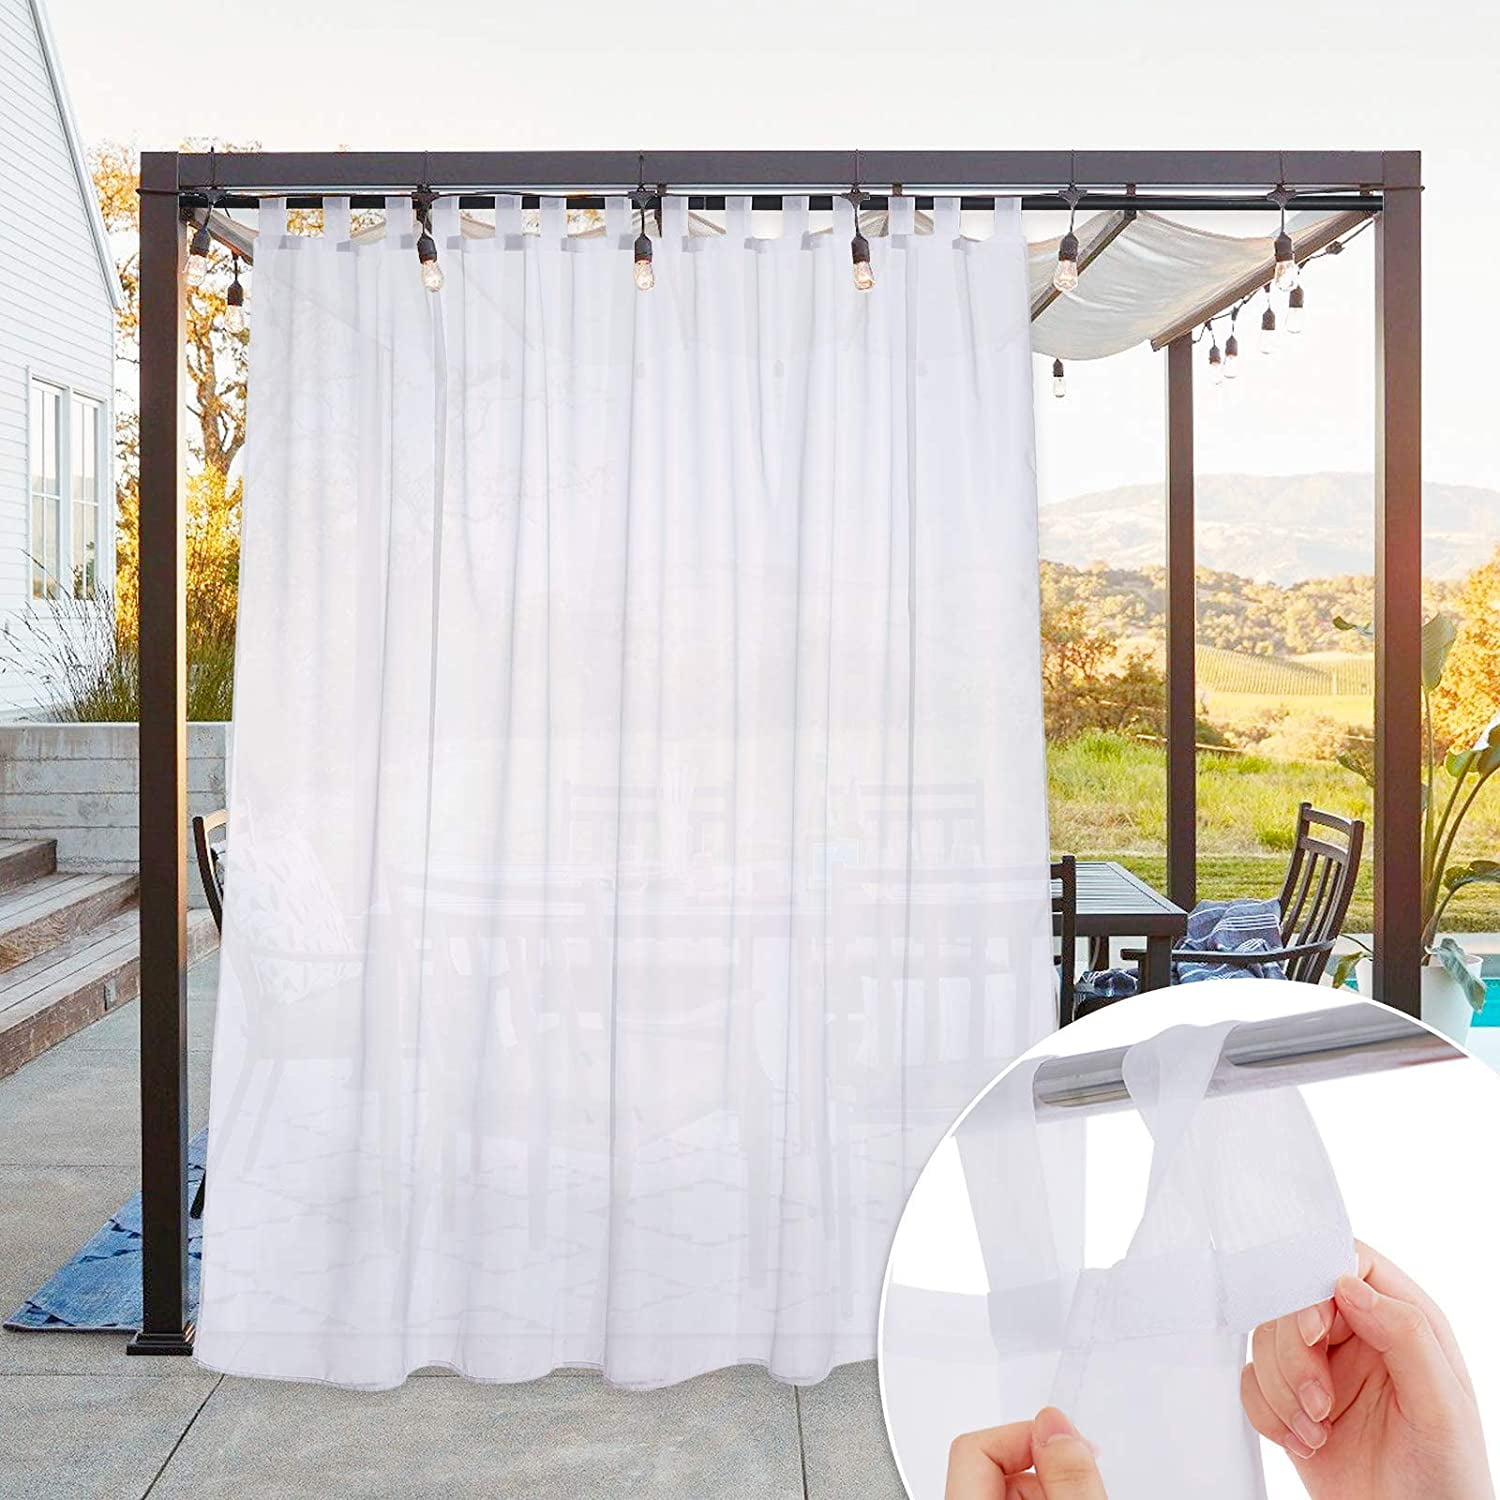 Single Panel, 54 Inch by 84 Inch, White NICETOWN White Sheer Outdoor Curtain Panel Elegant Tab Top Waterproof Curtain for Porch with Rope Tieback 